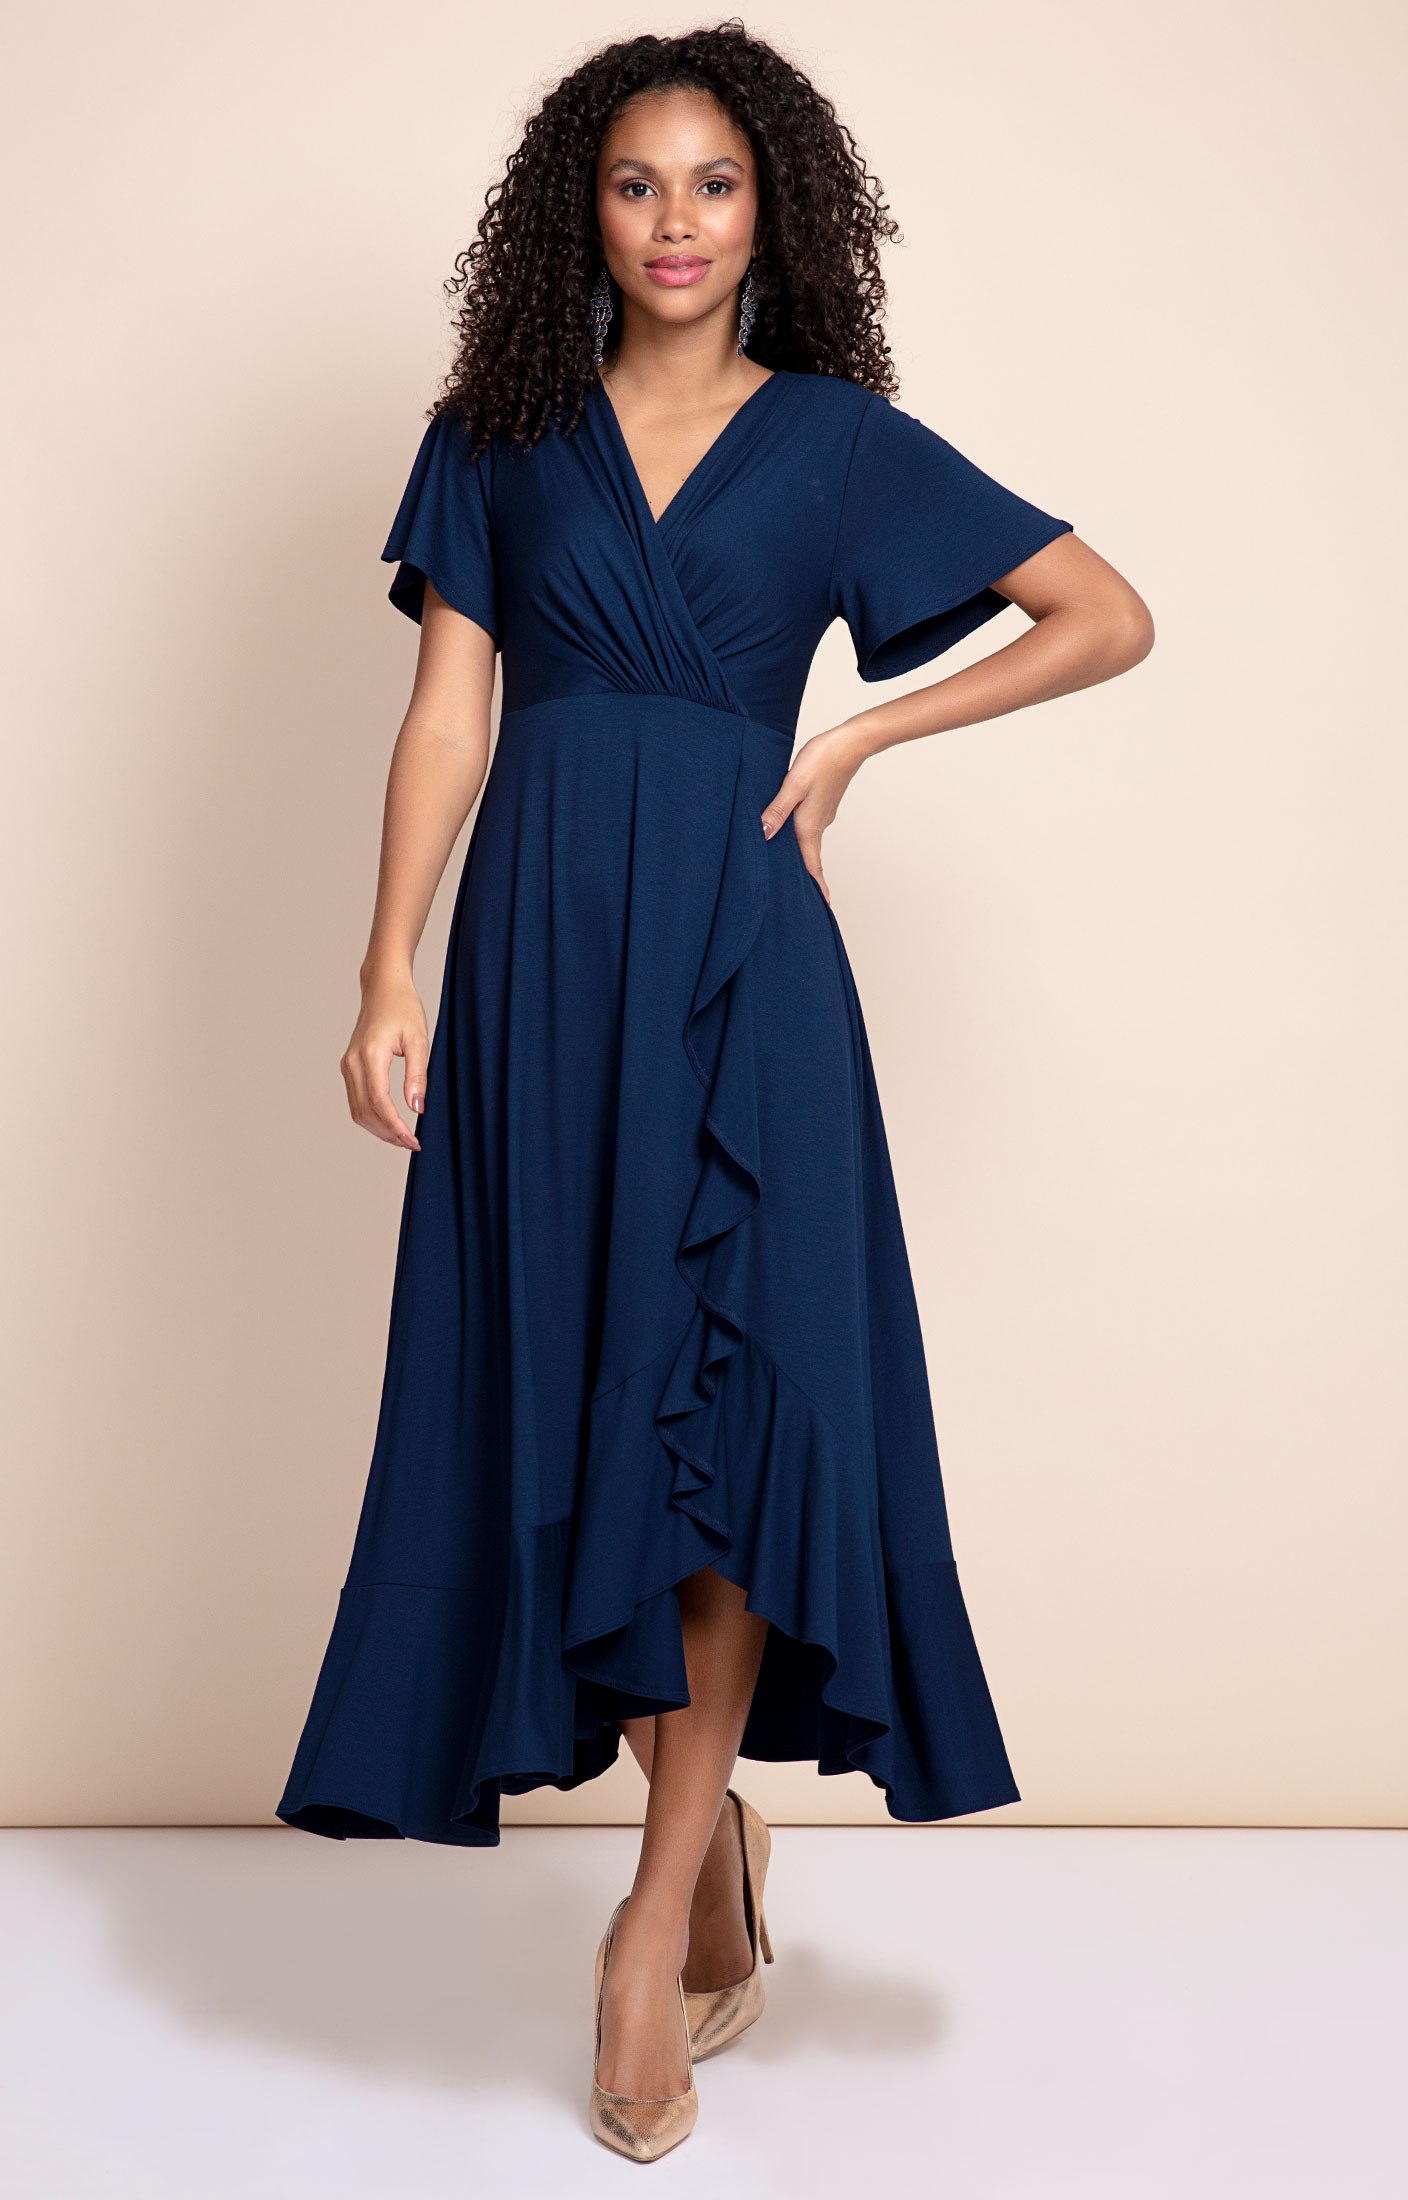 How To Accessorize A Navy Blue Dress For A Wedding